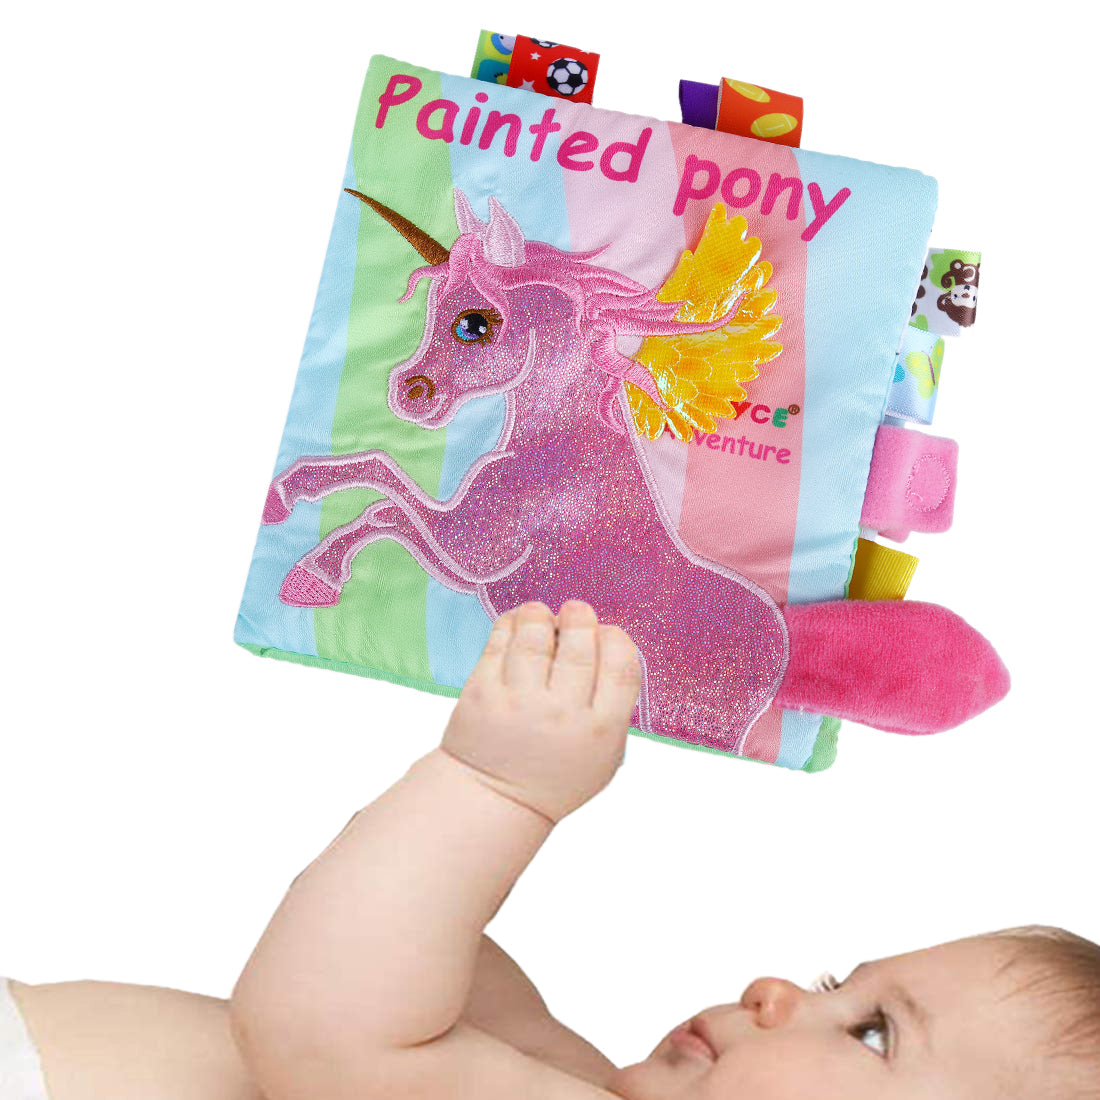 Painted Pony Educational Learning 3D Cloth Book With Rustle Paper - Multicolour